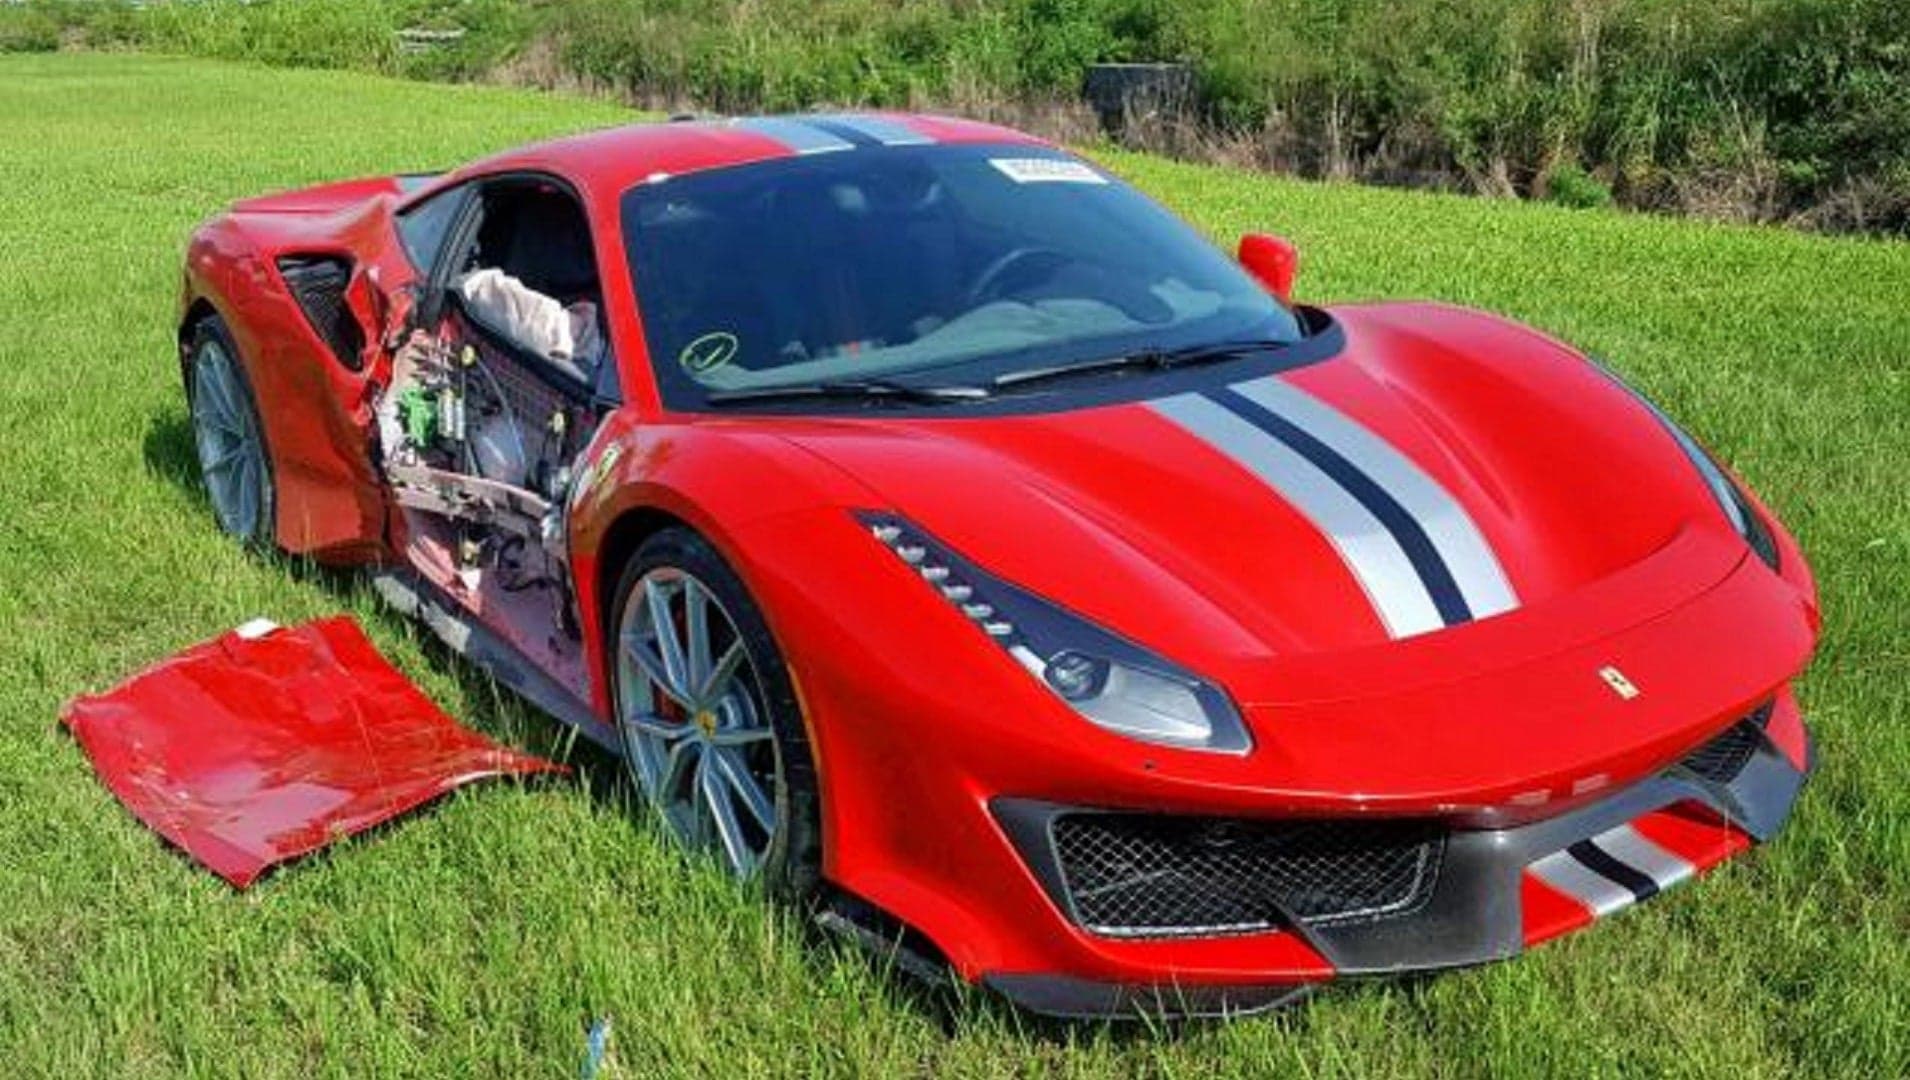 Would You Pay $417,000 for This Totaled 2019 Ferrari 488 Pista With 149 Miles?